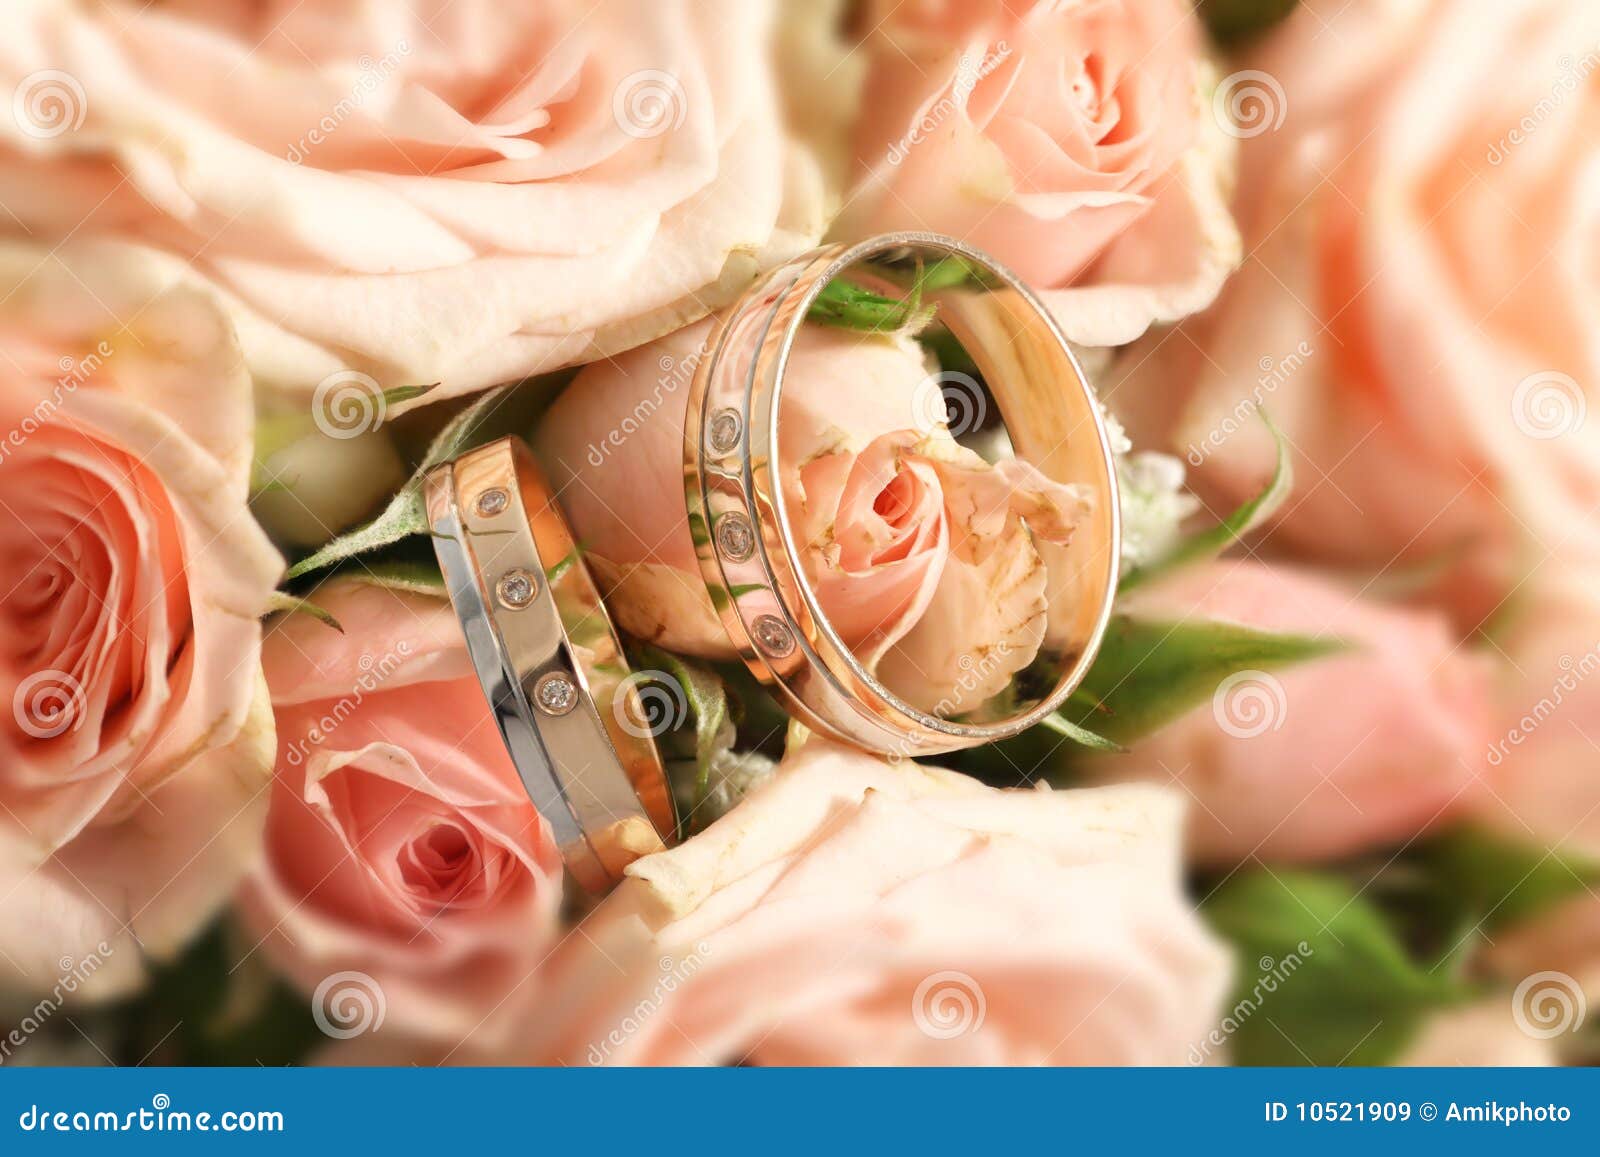 Wedding Flowers With Gold Rings Royalty Free Stock Images - Image 